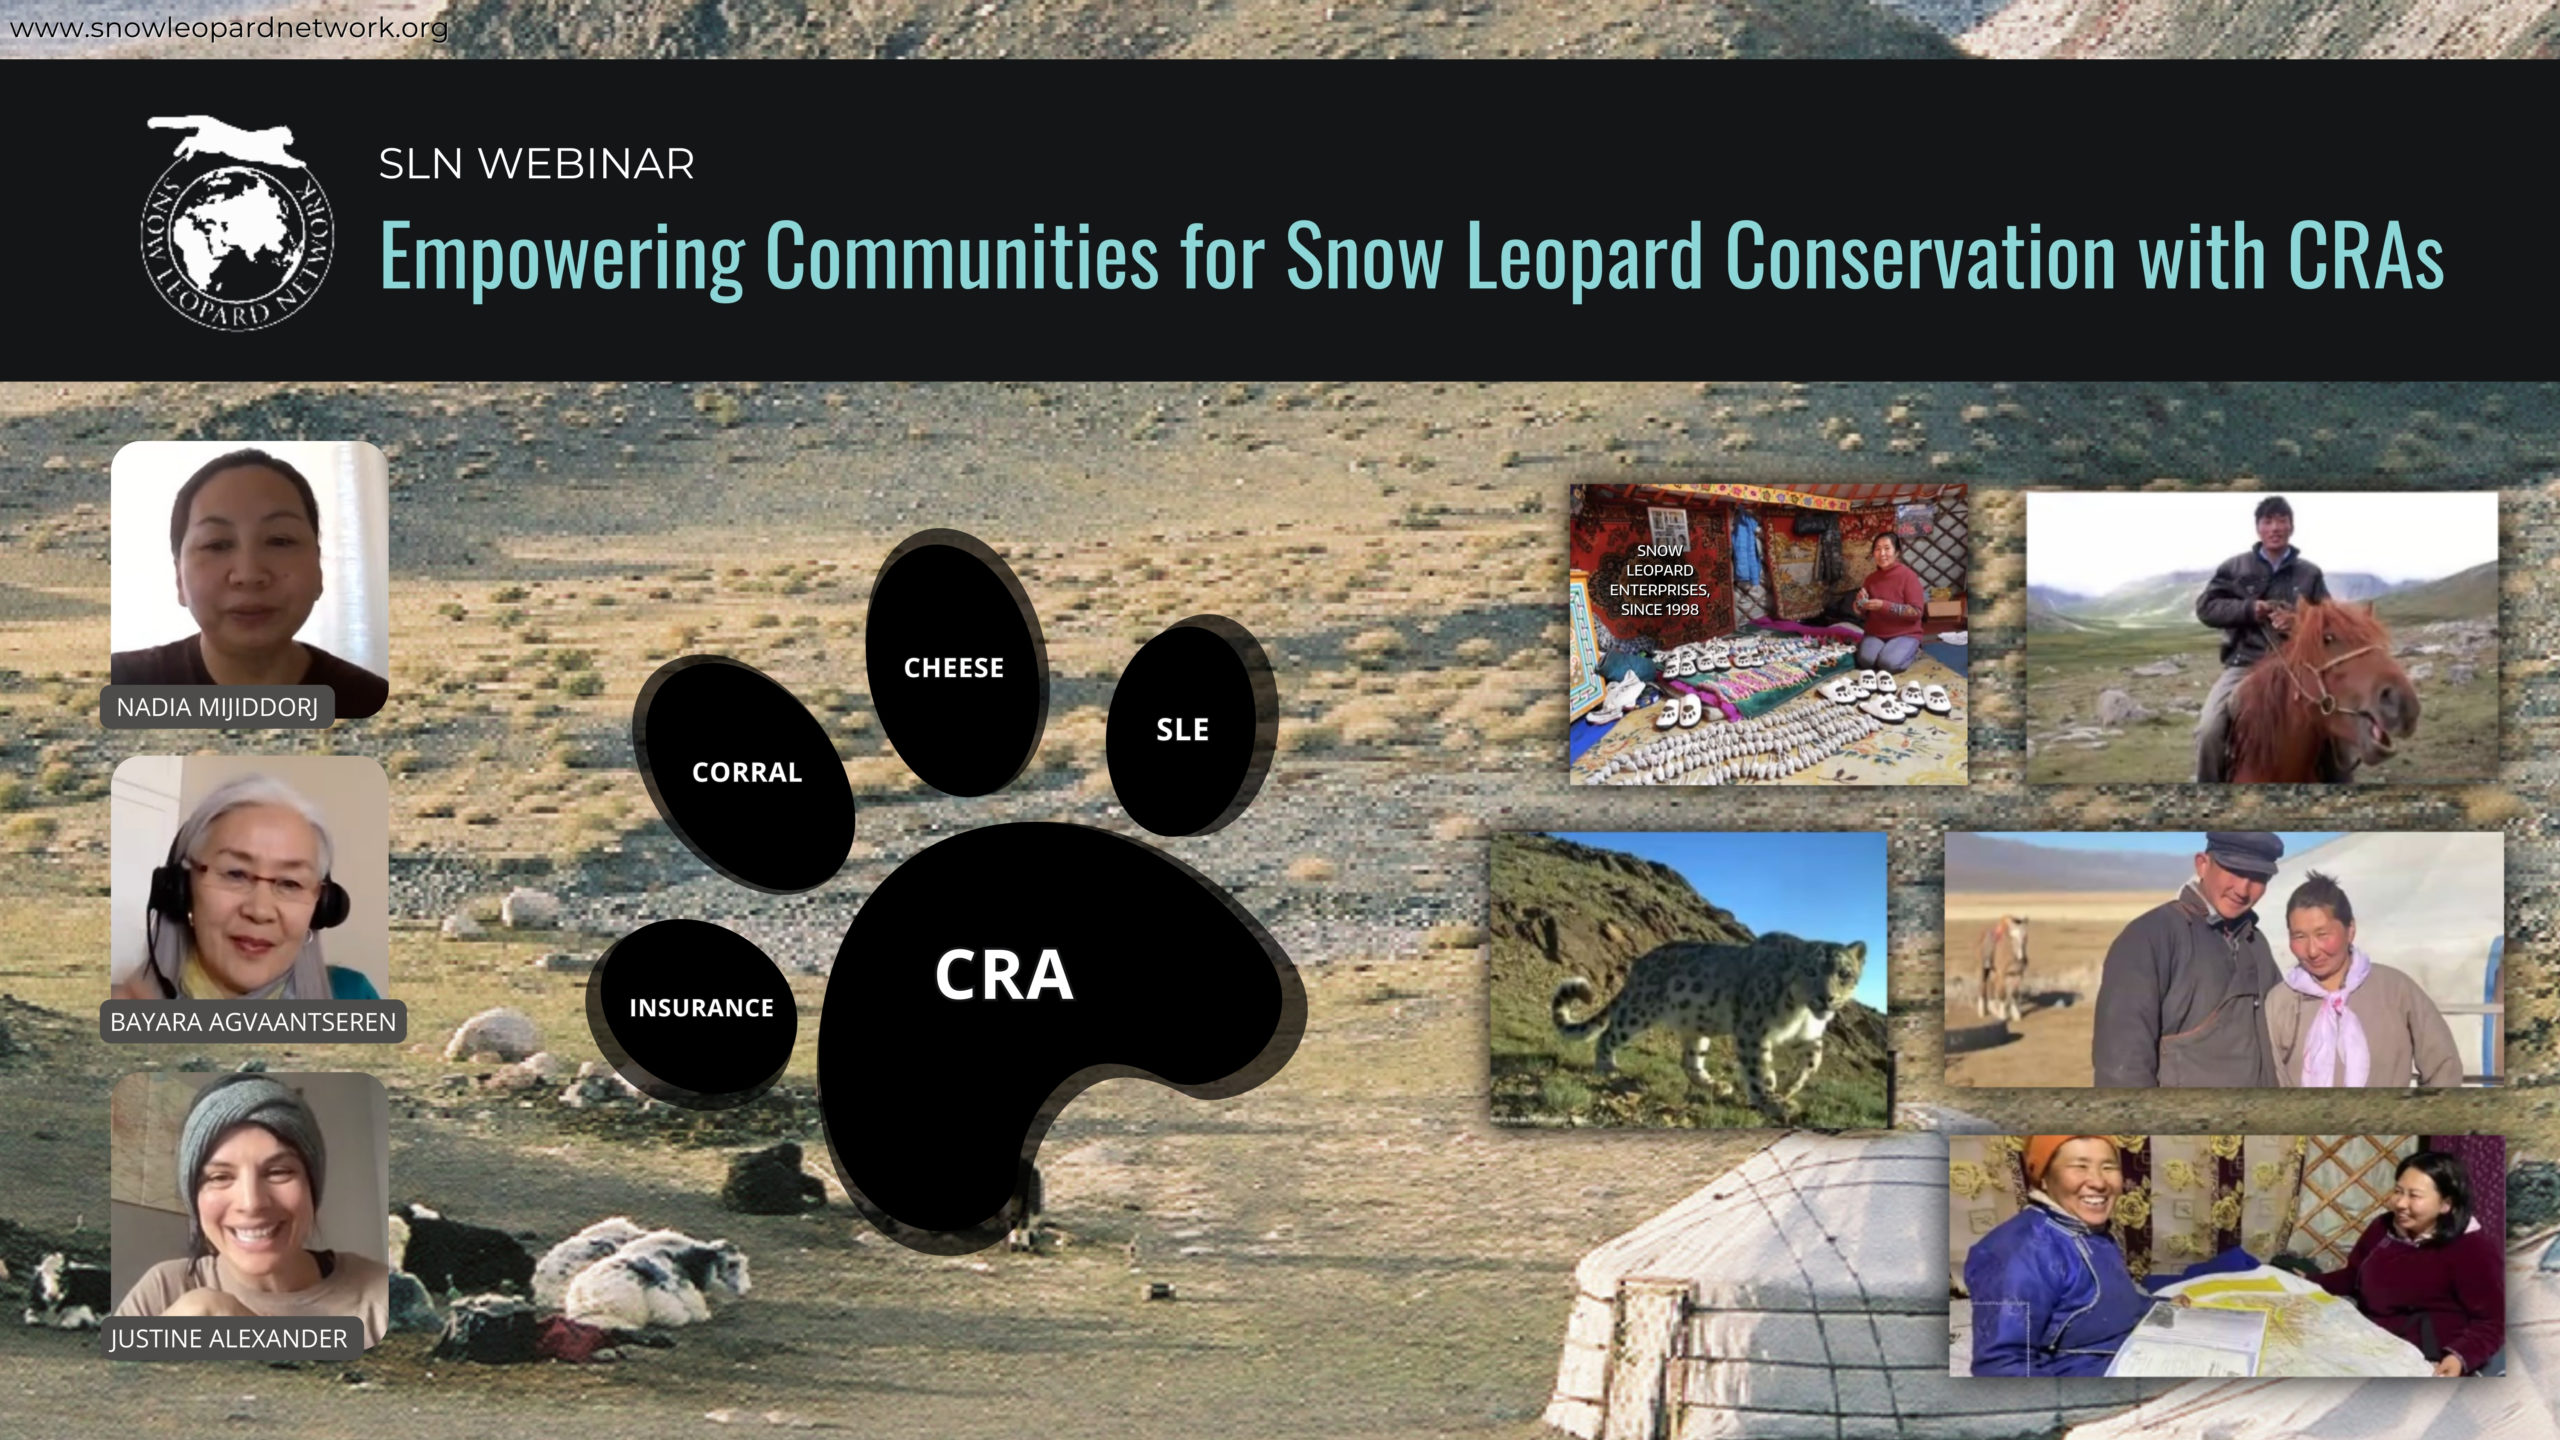 Empowering Communities for Snow Leopard Conservation with CRAs